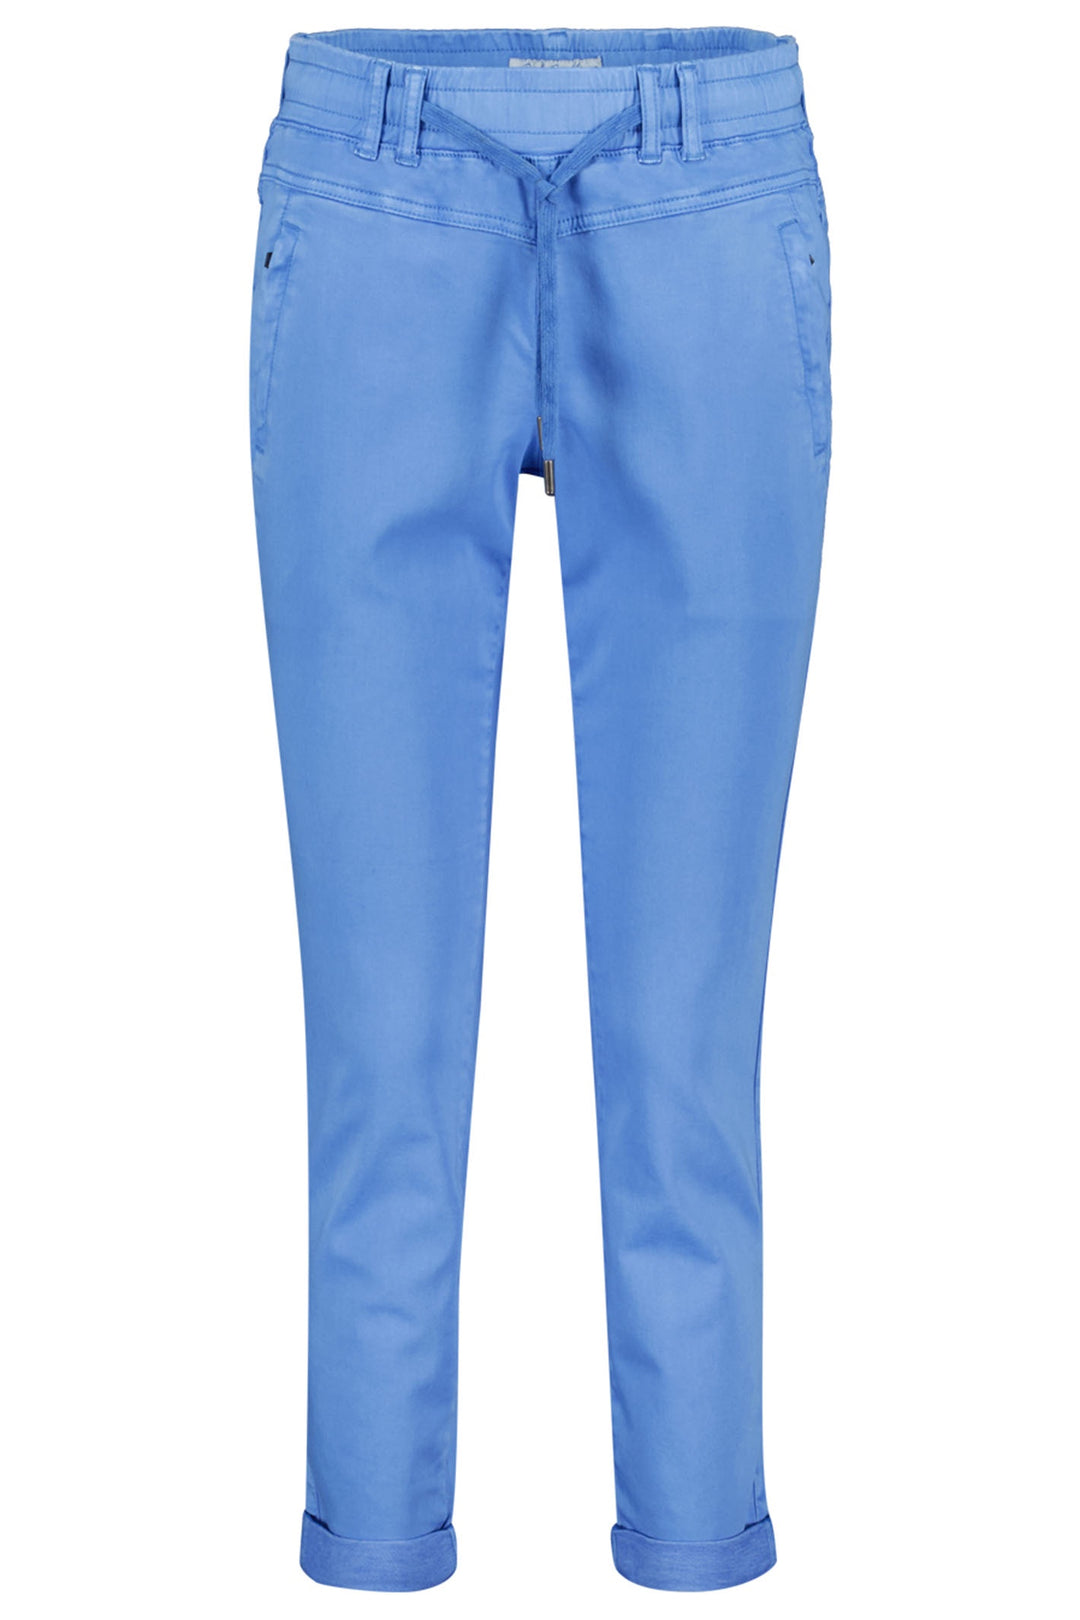 Red Button SRB4154 Tessy Mid Blue Cropped Jogger Trousers - Dotique